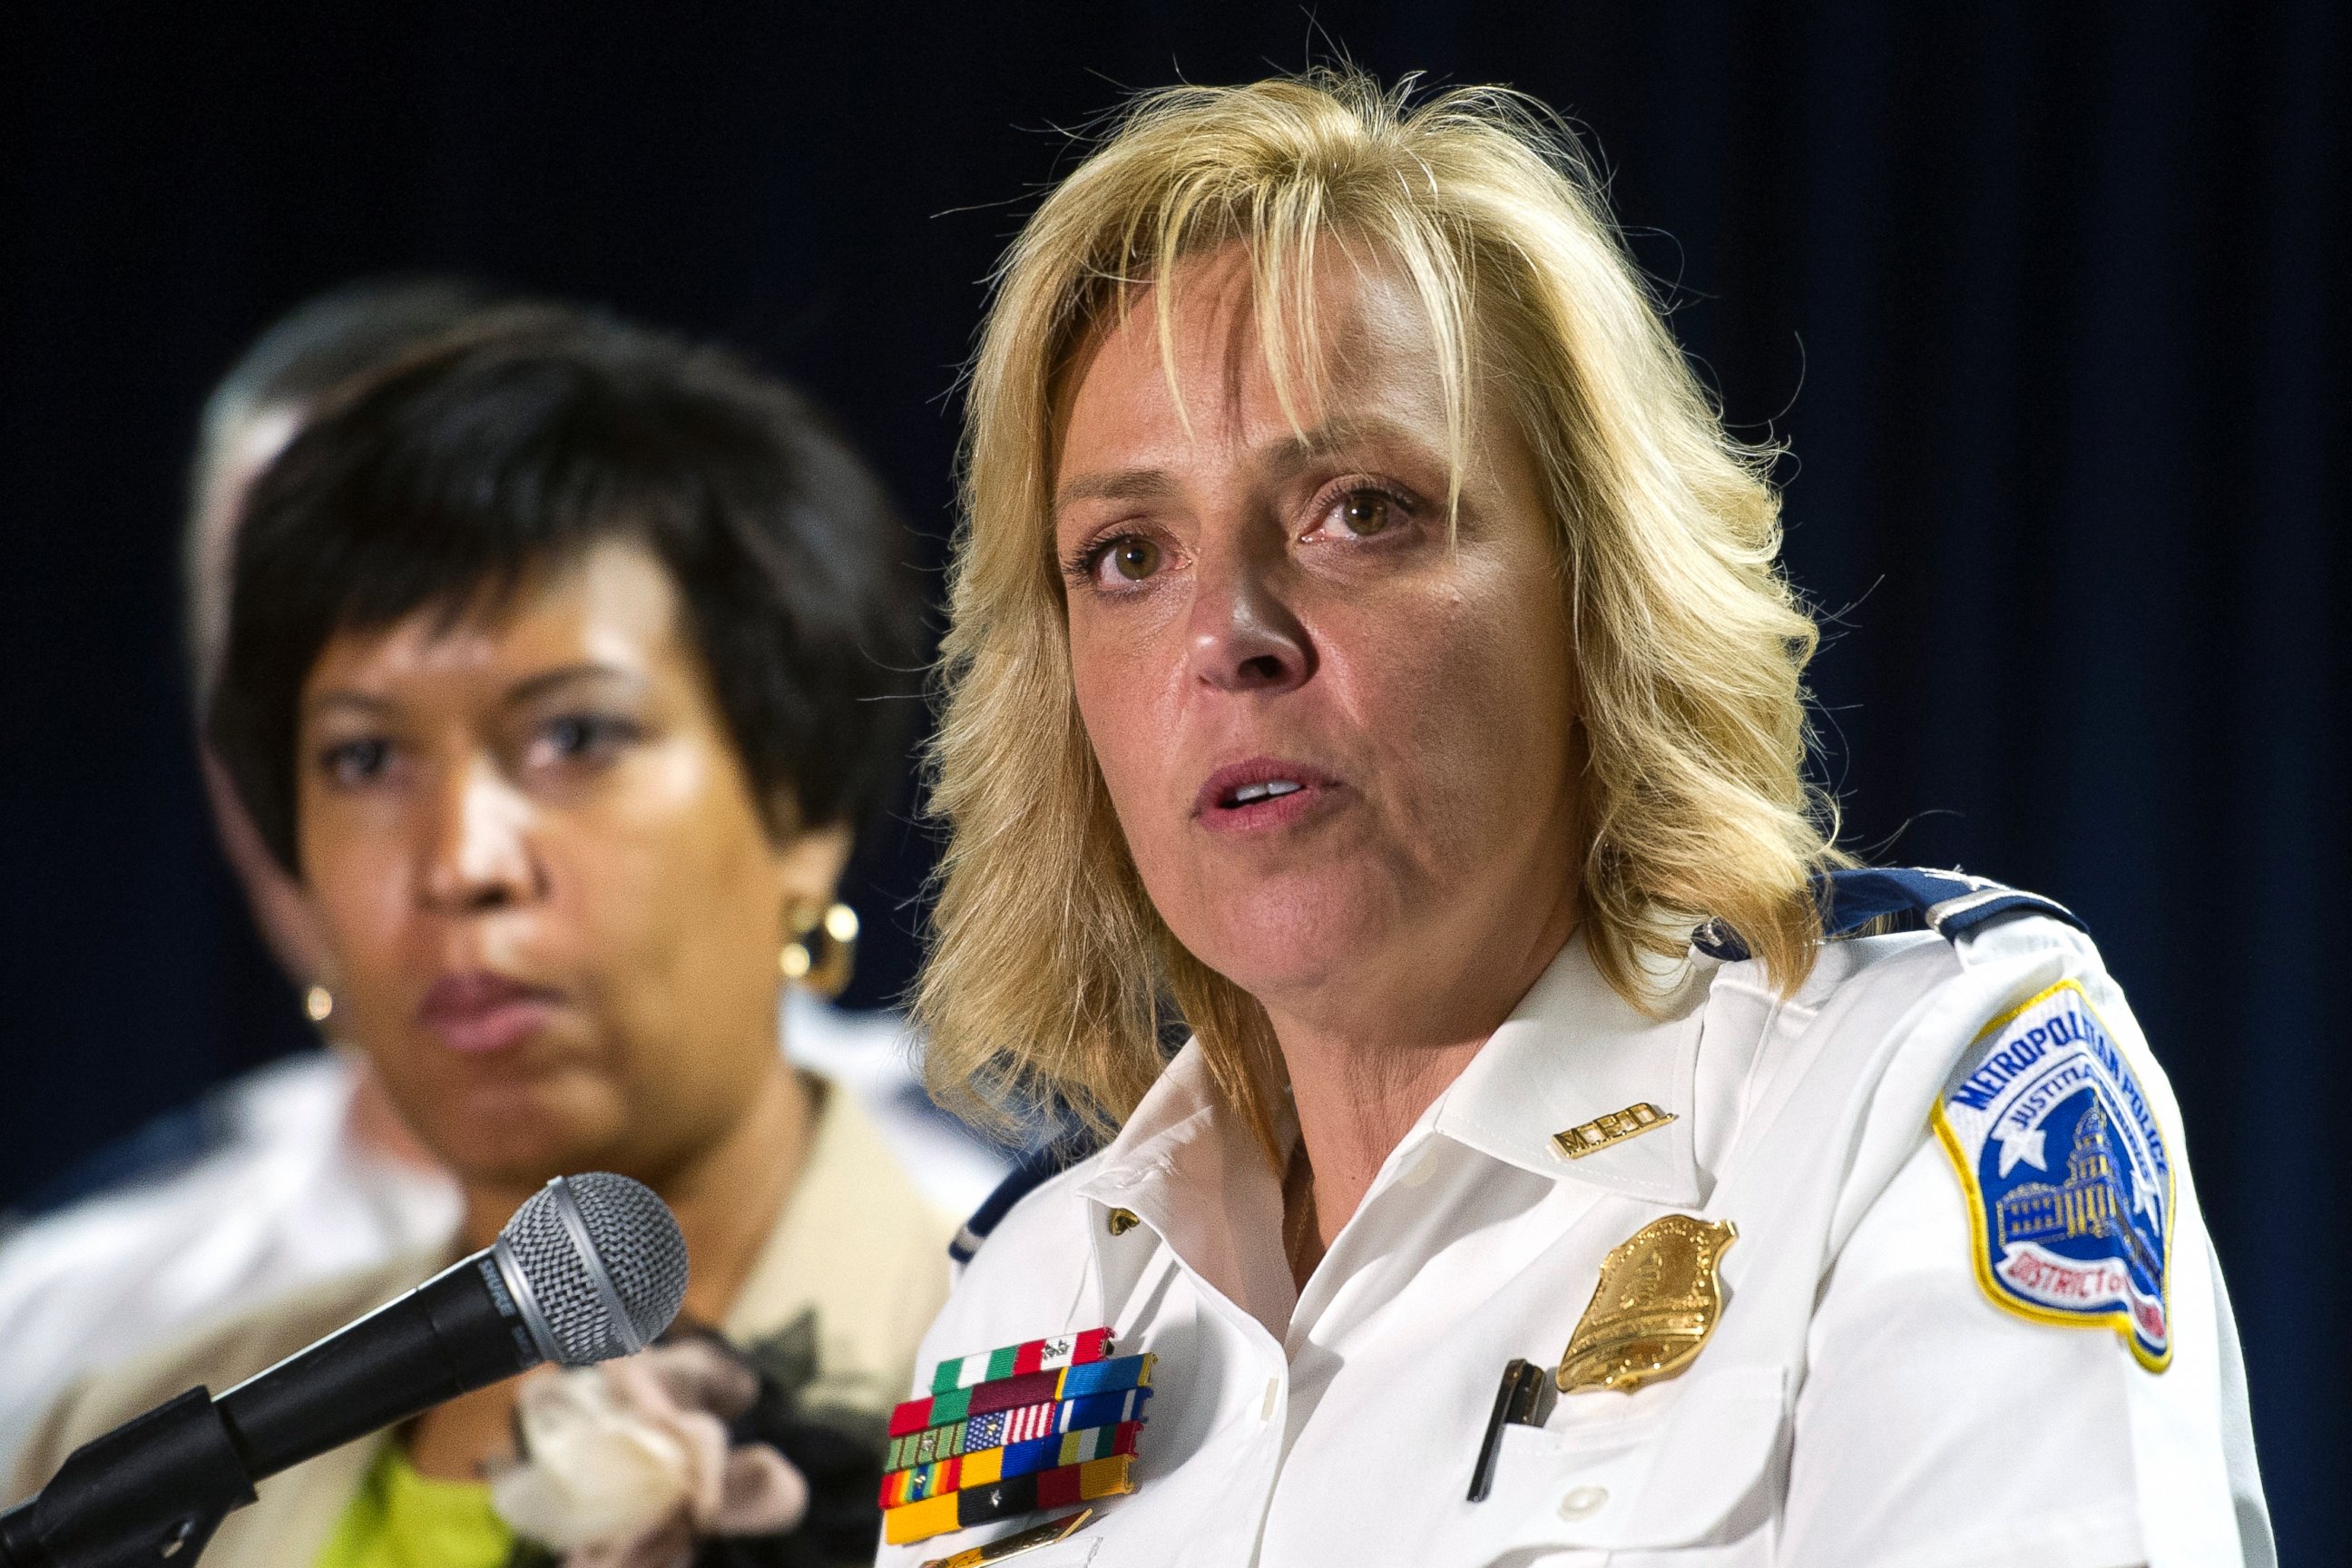 PHOTO: Washington Mayor Muriel Bowser listens at left as Police Chief Cathy Lanier speaks during a news conference in Washington, May 21, 2015.